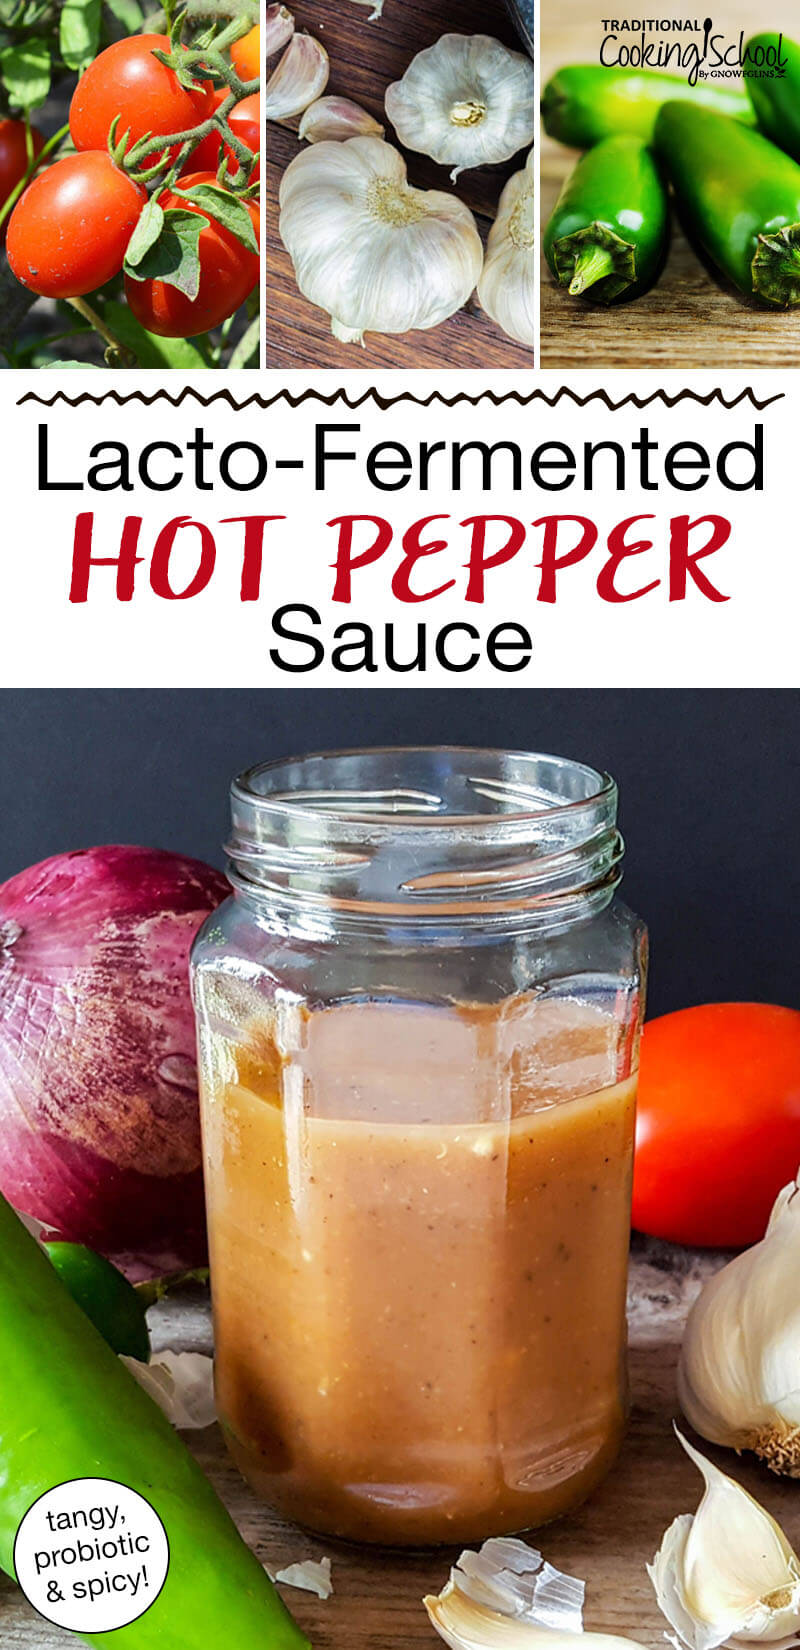 Photo collage of tomatoes, garlic, hot peppers, and homemade hot sauce in a small jar. Text overlay says: "Lacto-Fermented Hot Pepper Sauce (tangy, probiotic & spicy!)"